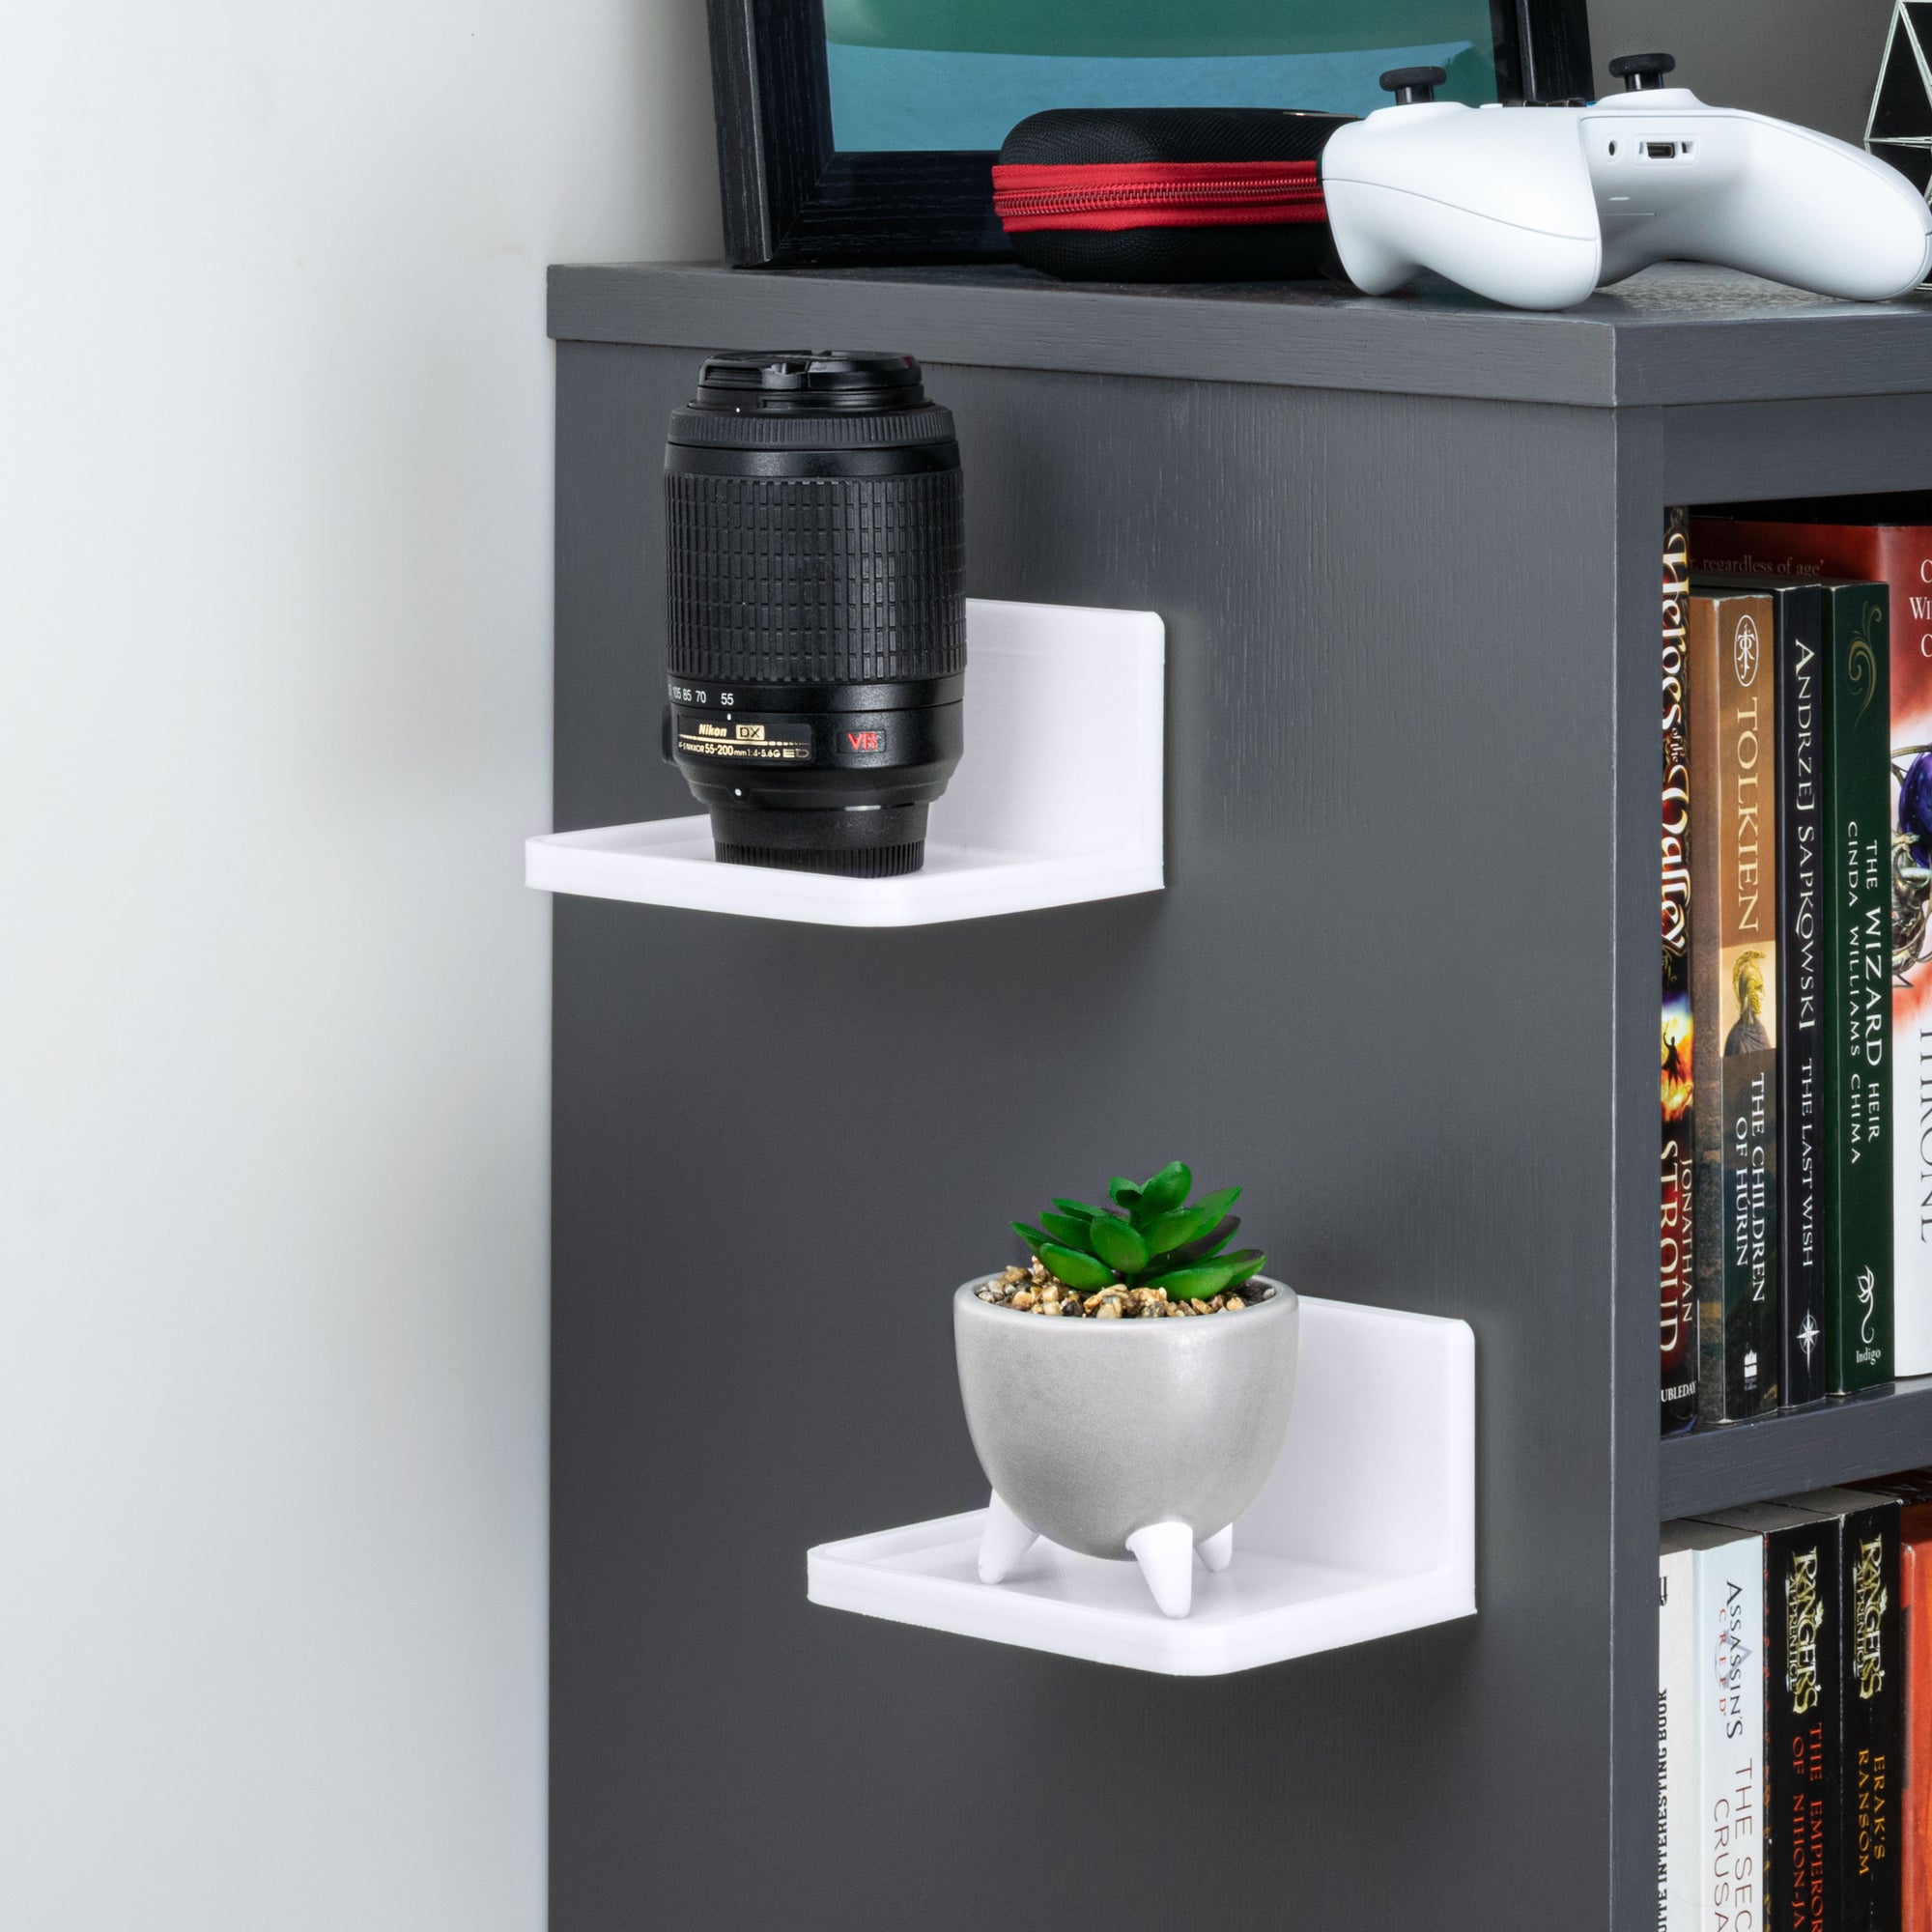 Brainwavz 6.5 Corner Shelf Mount for Speakers, Cameras, Baby Monitors, Plants, Books Electronics, Collectibles & More, Adhesive & Screw in Floating